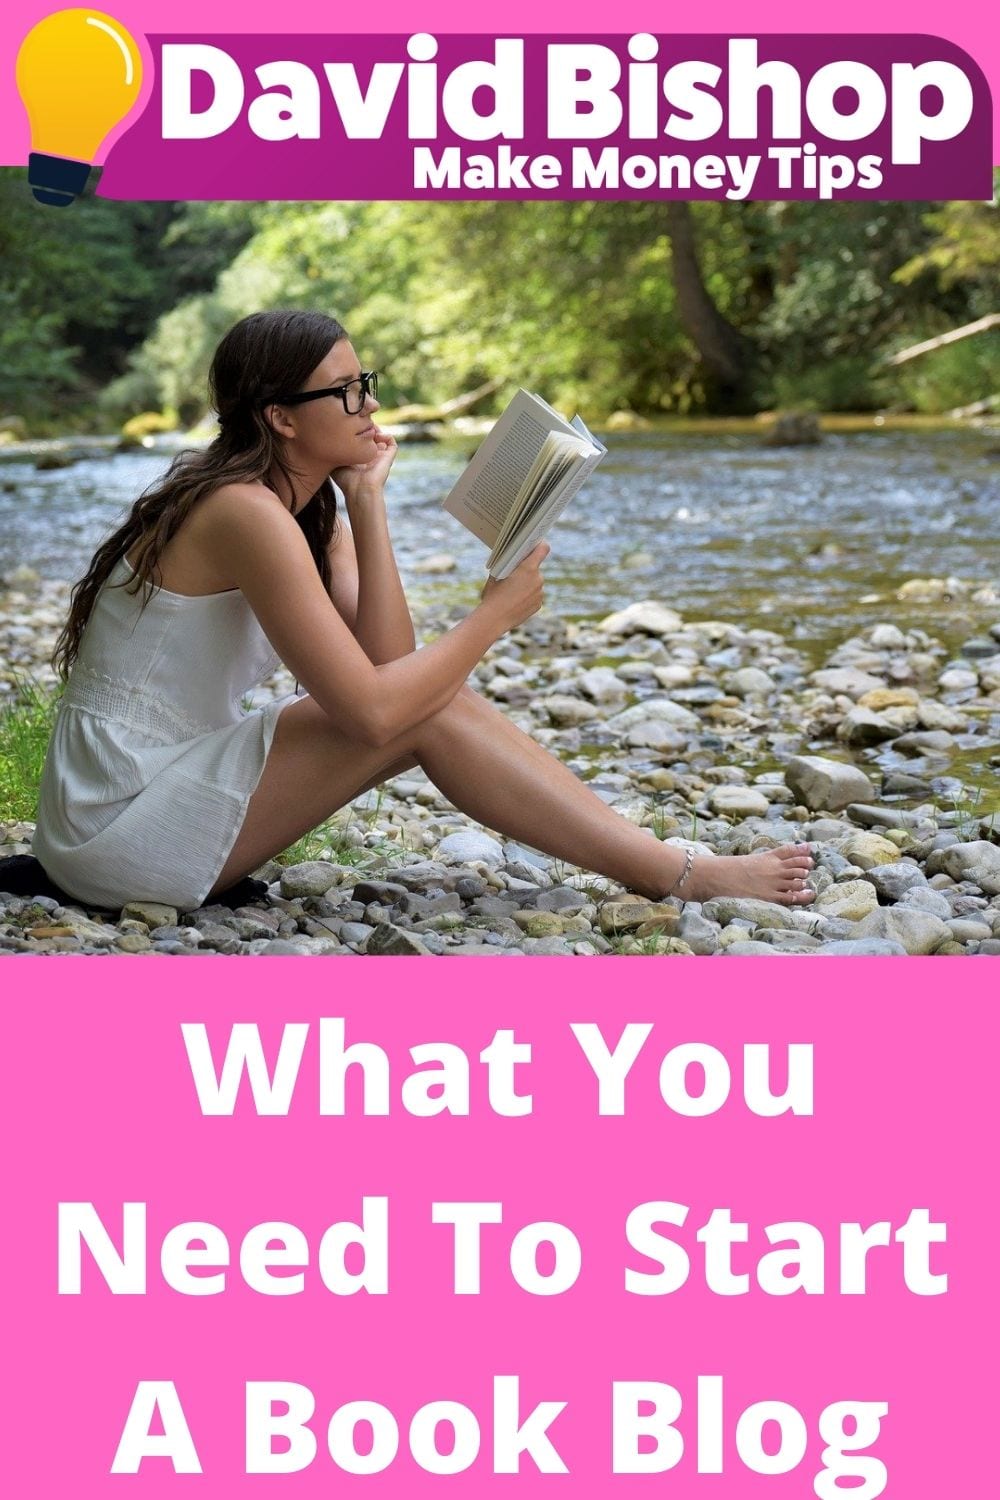 how to start a book blog - and What You Need To Start A Book Blog